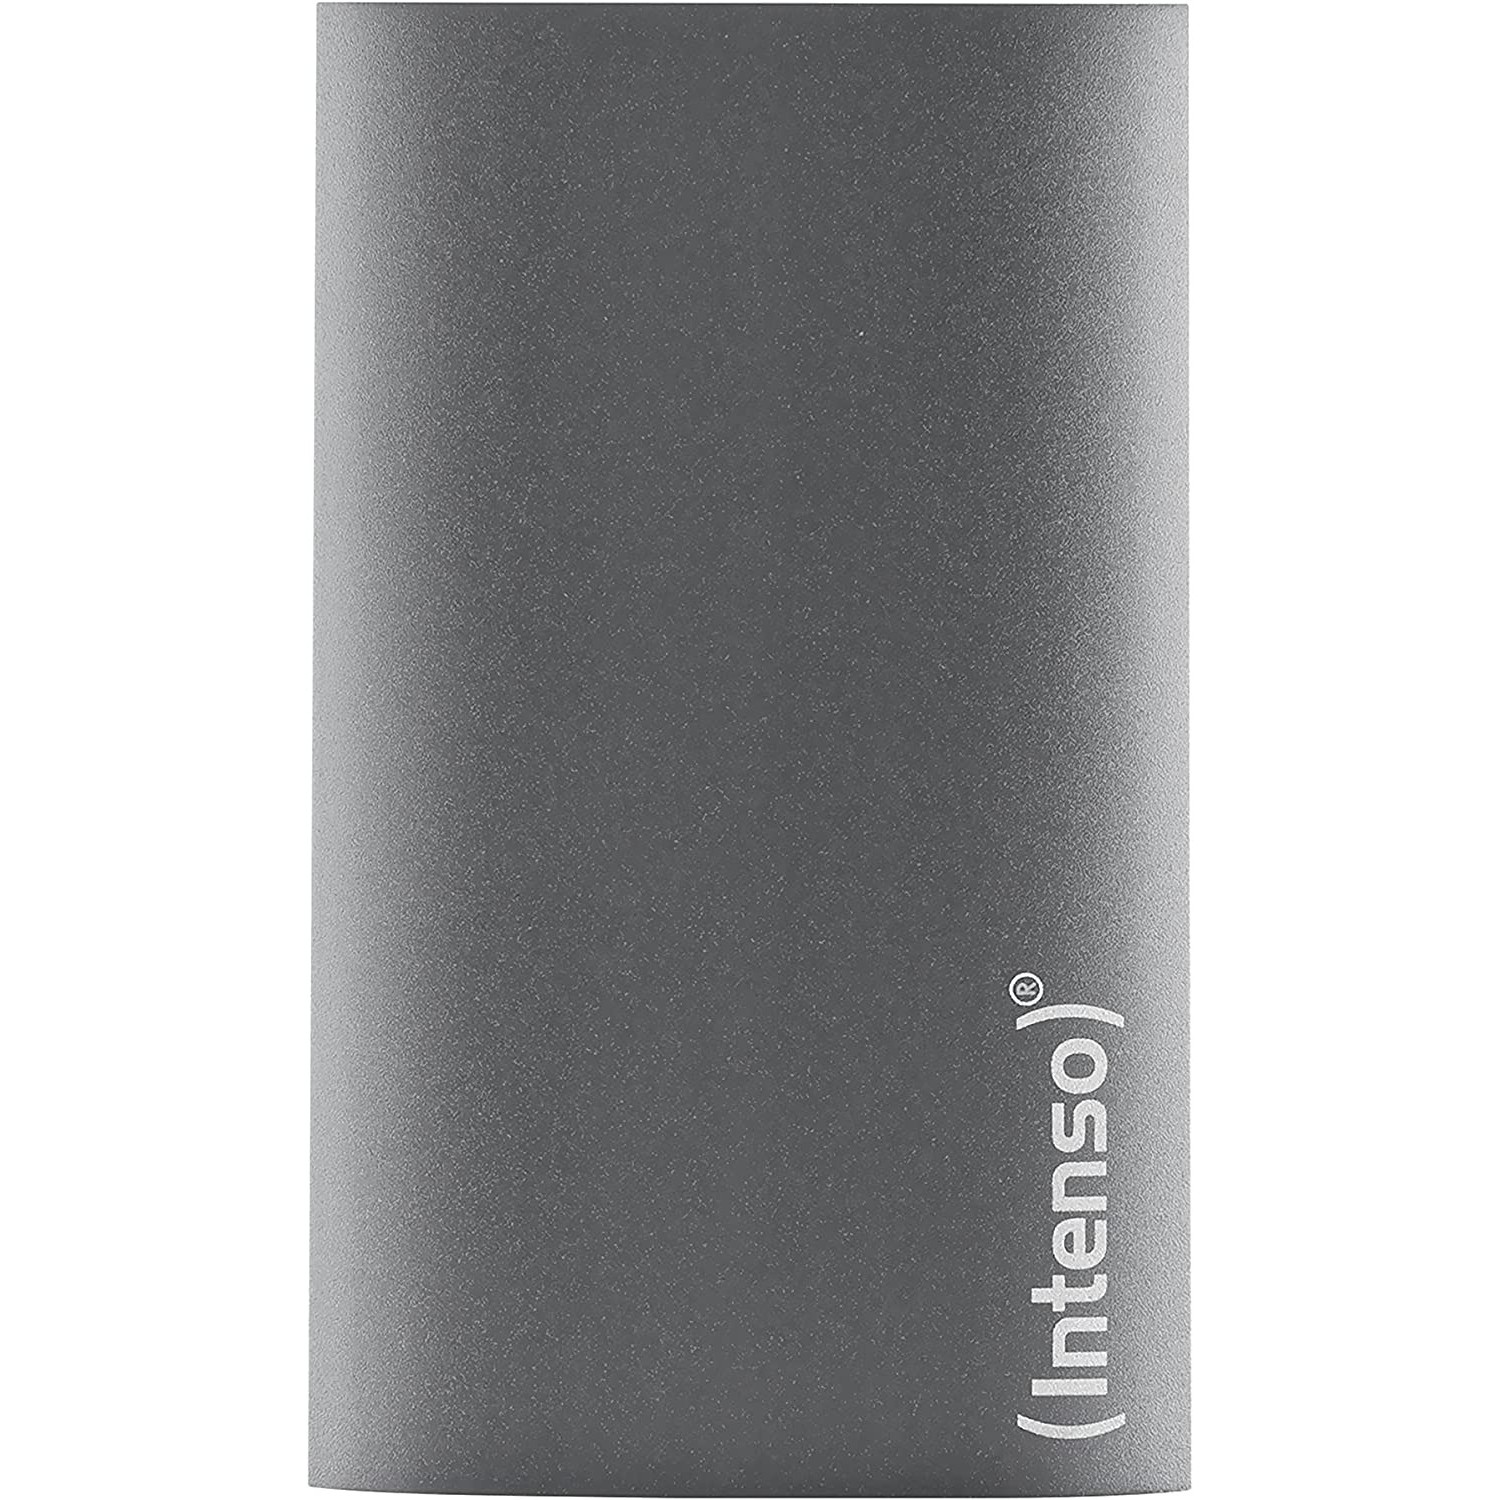 Intenso 3823470 external solid state drive